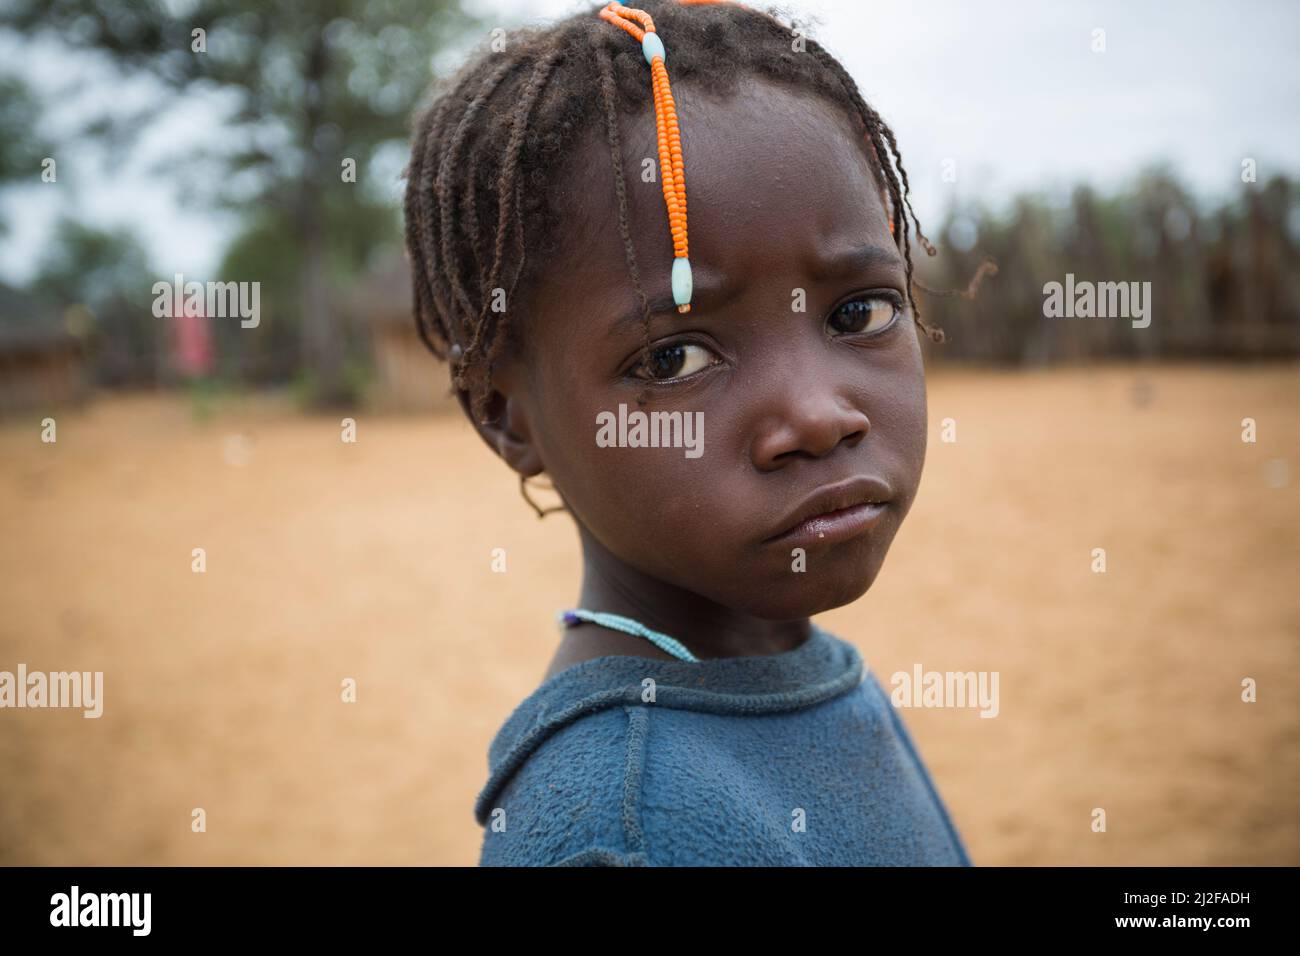 Girl with traditional hair braids and a sad expression in Omusati Region, Namibia, southwest Africa. Stock Photo